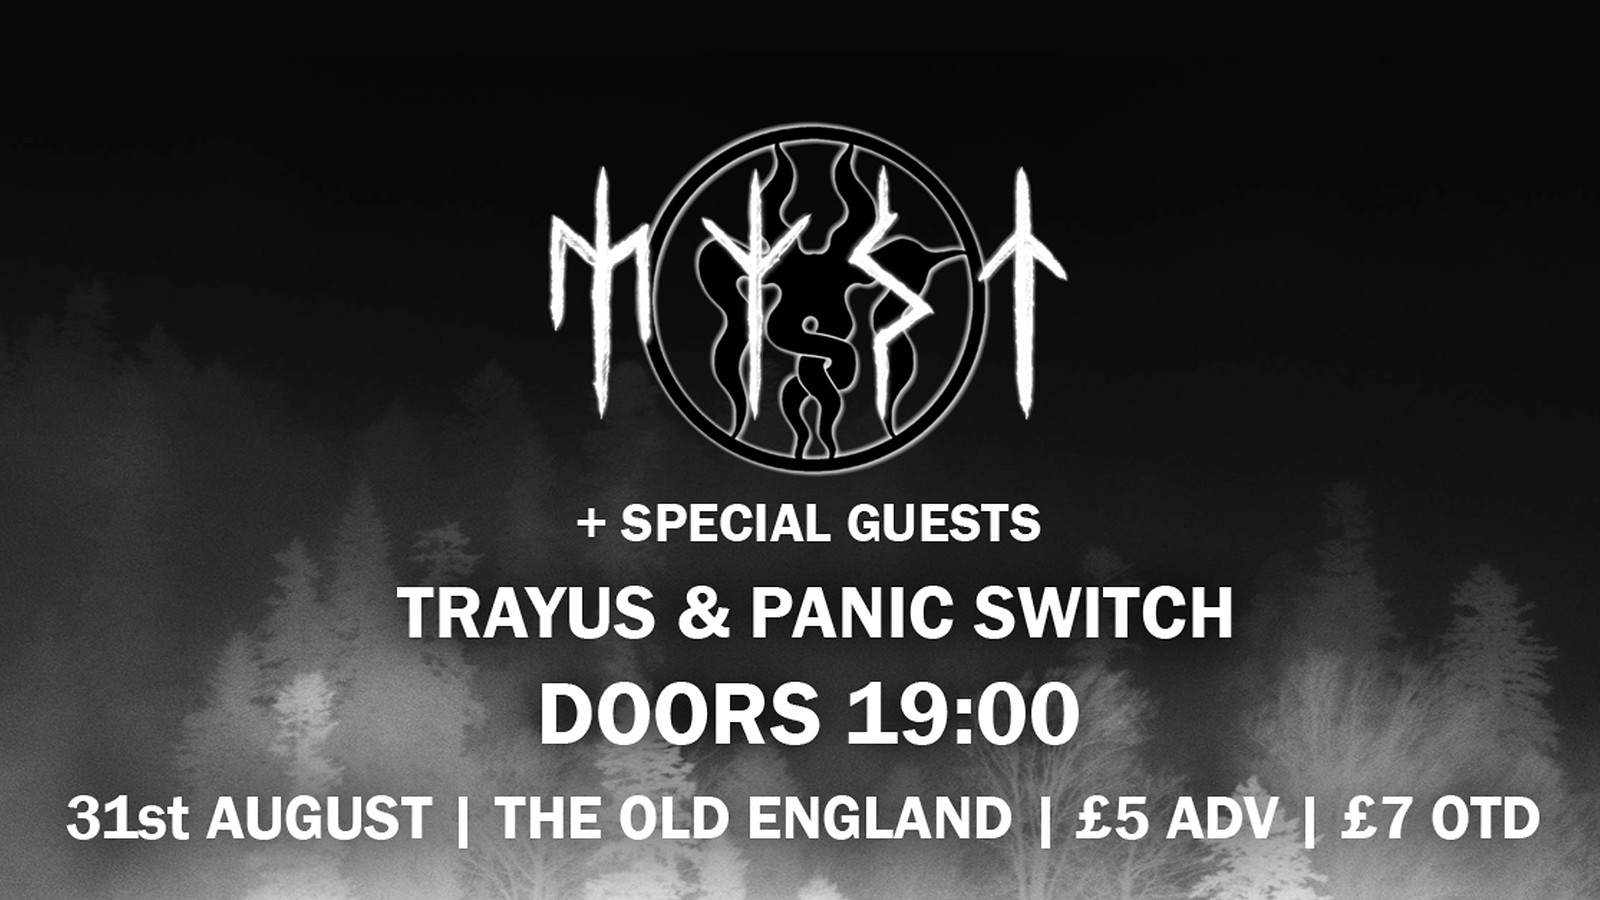 Myst + Special Guests Trayus and Panic Switch at The Old England Pub